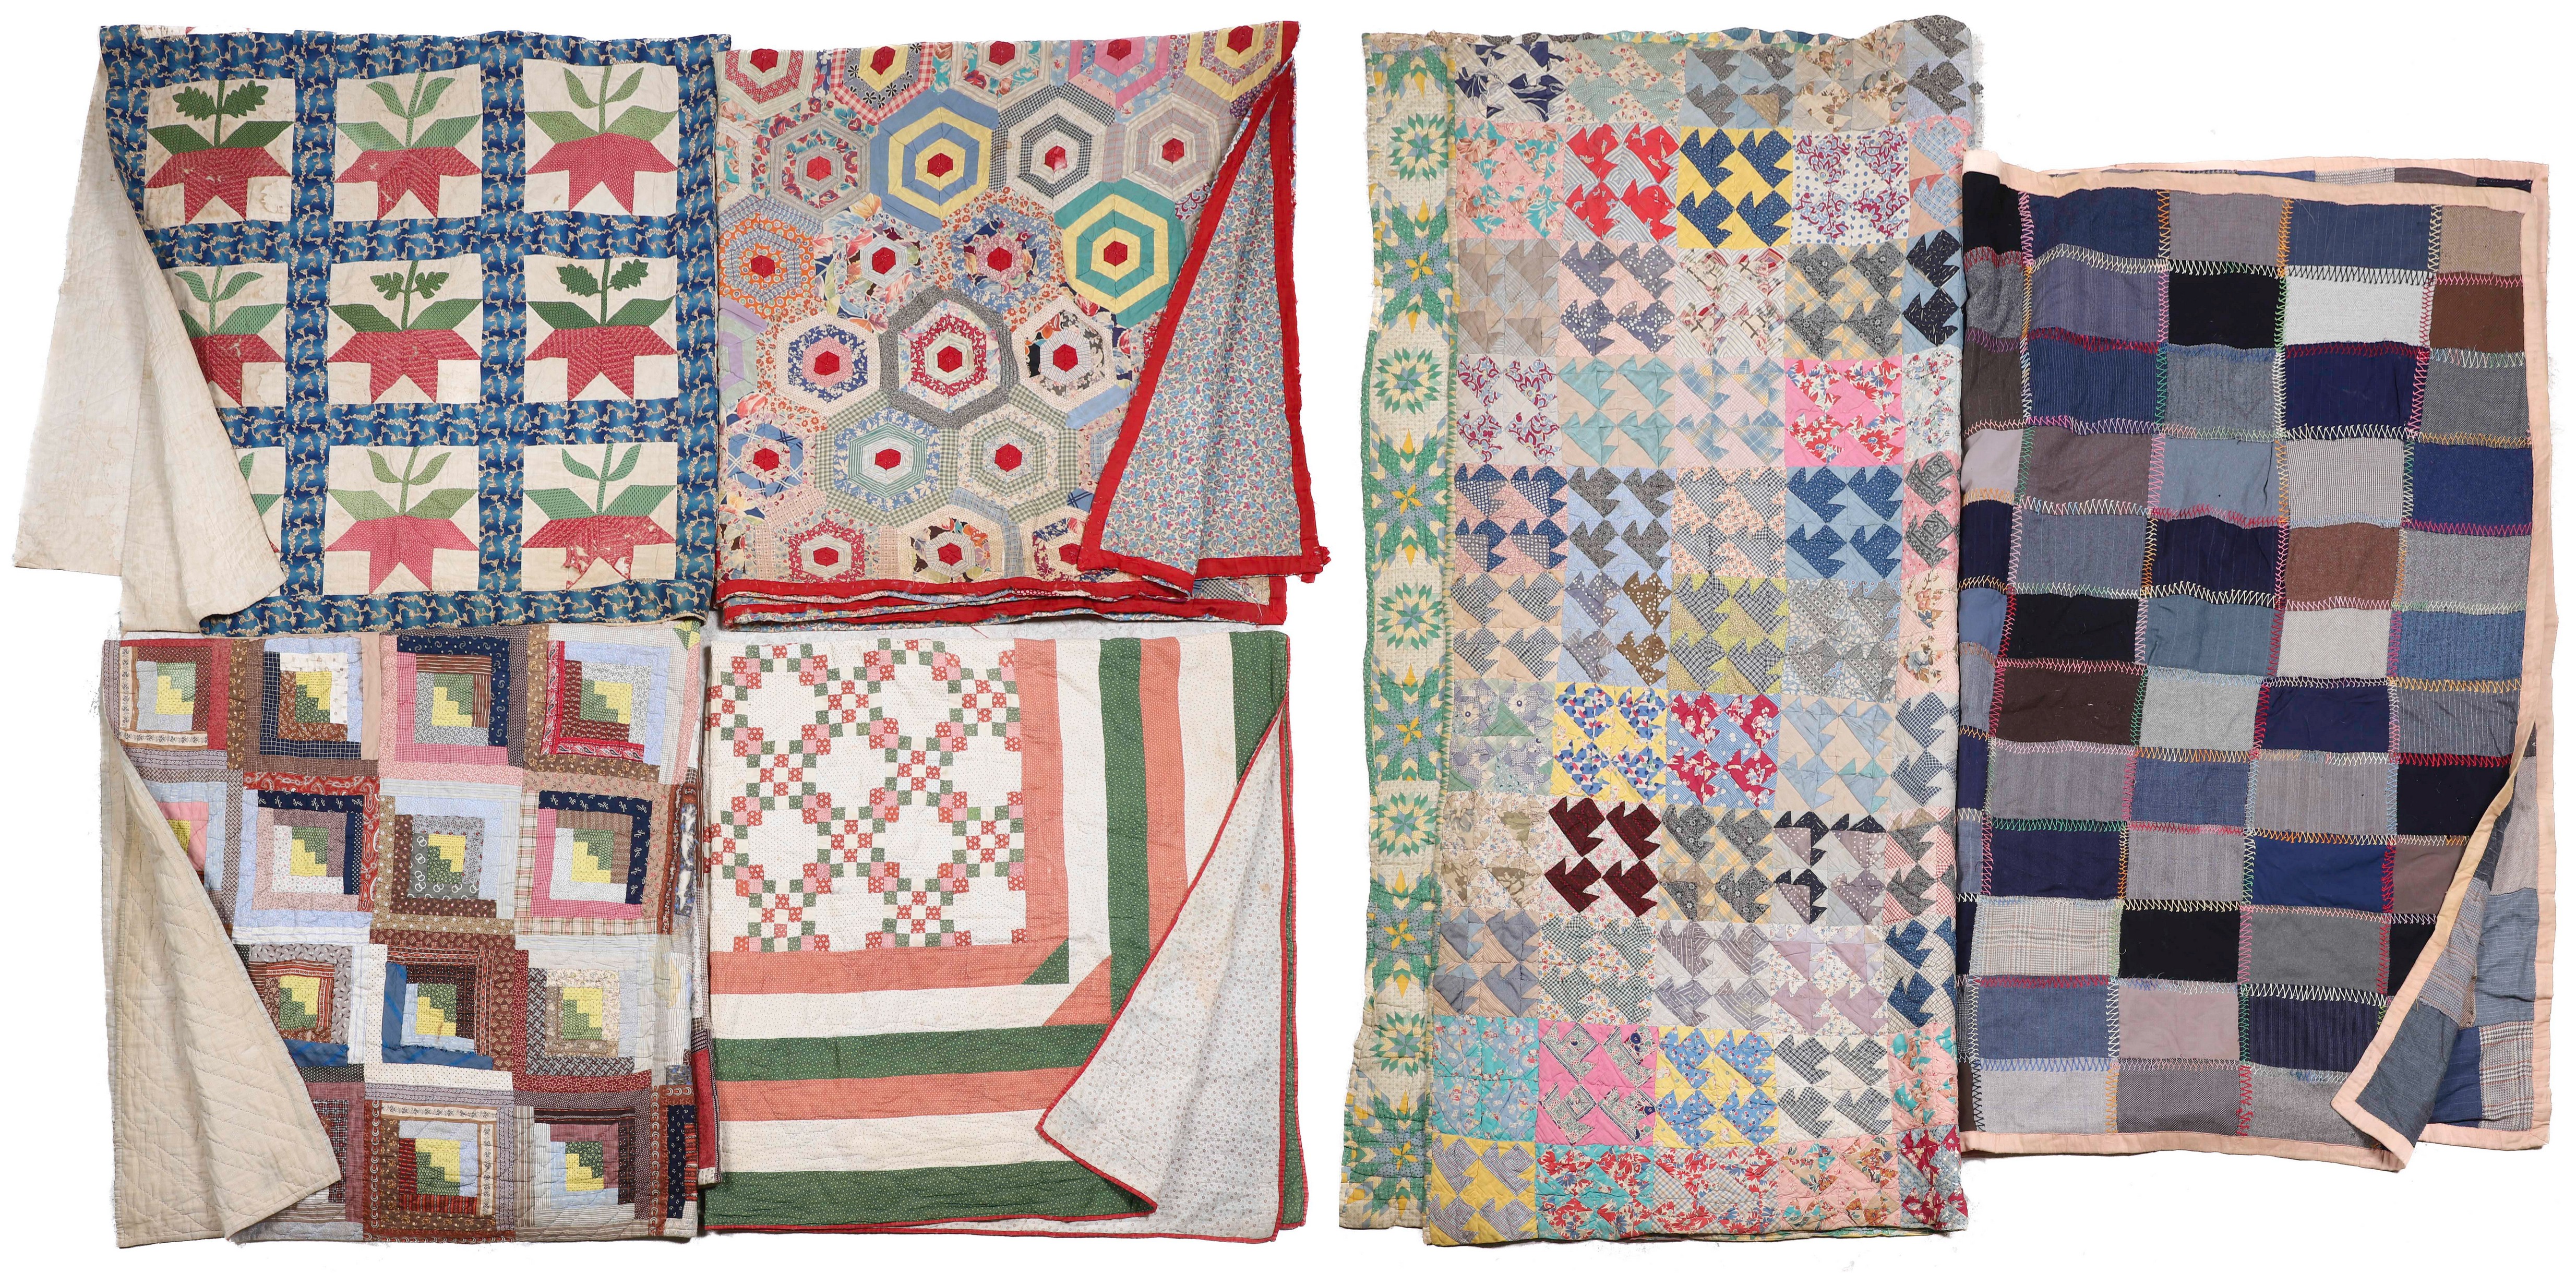  6 19th 20th C patchwork quilts  2e11f7